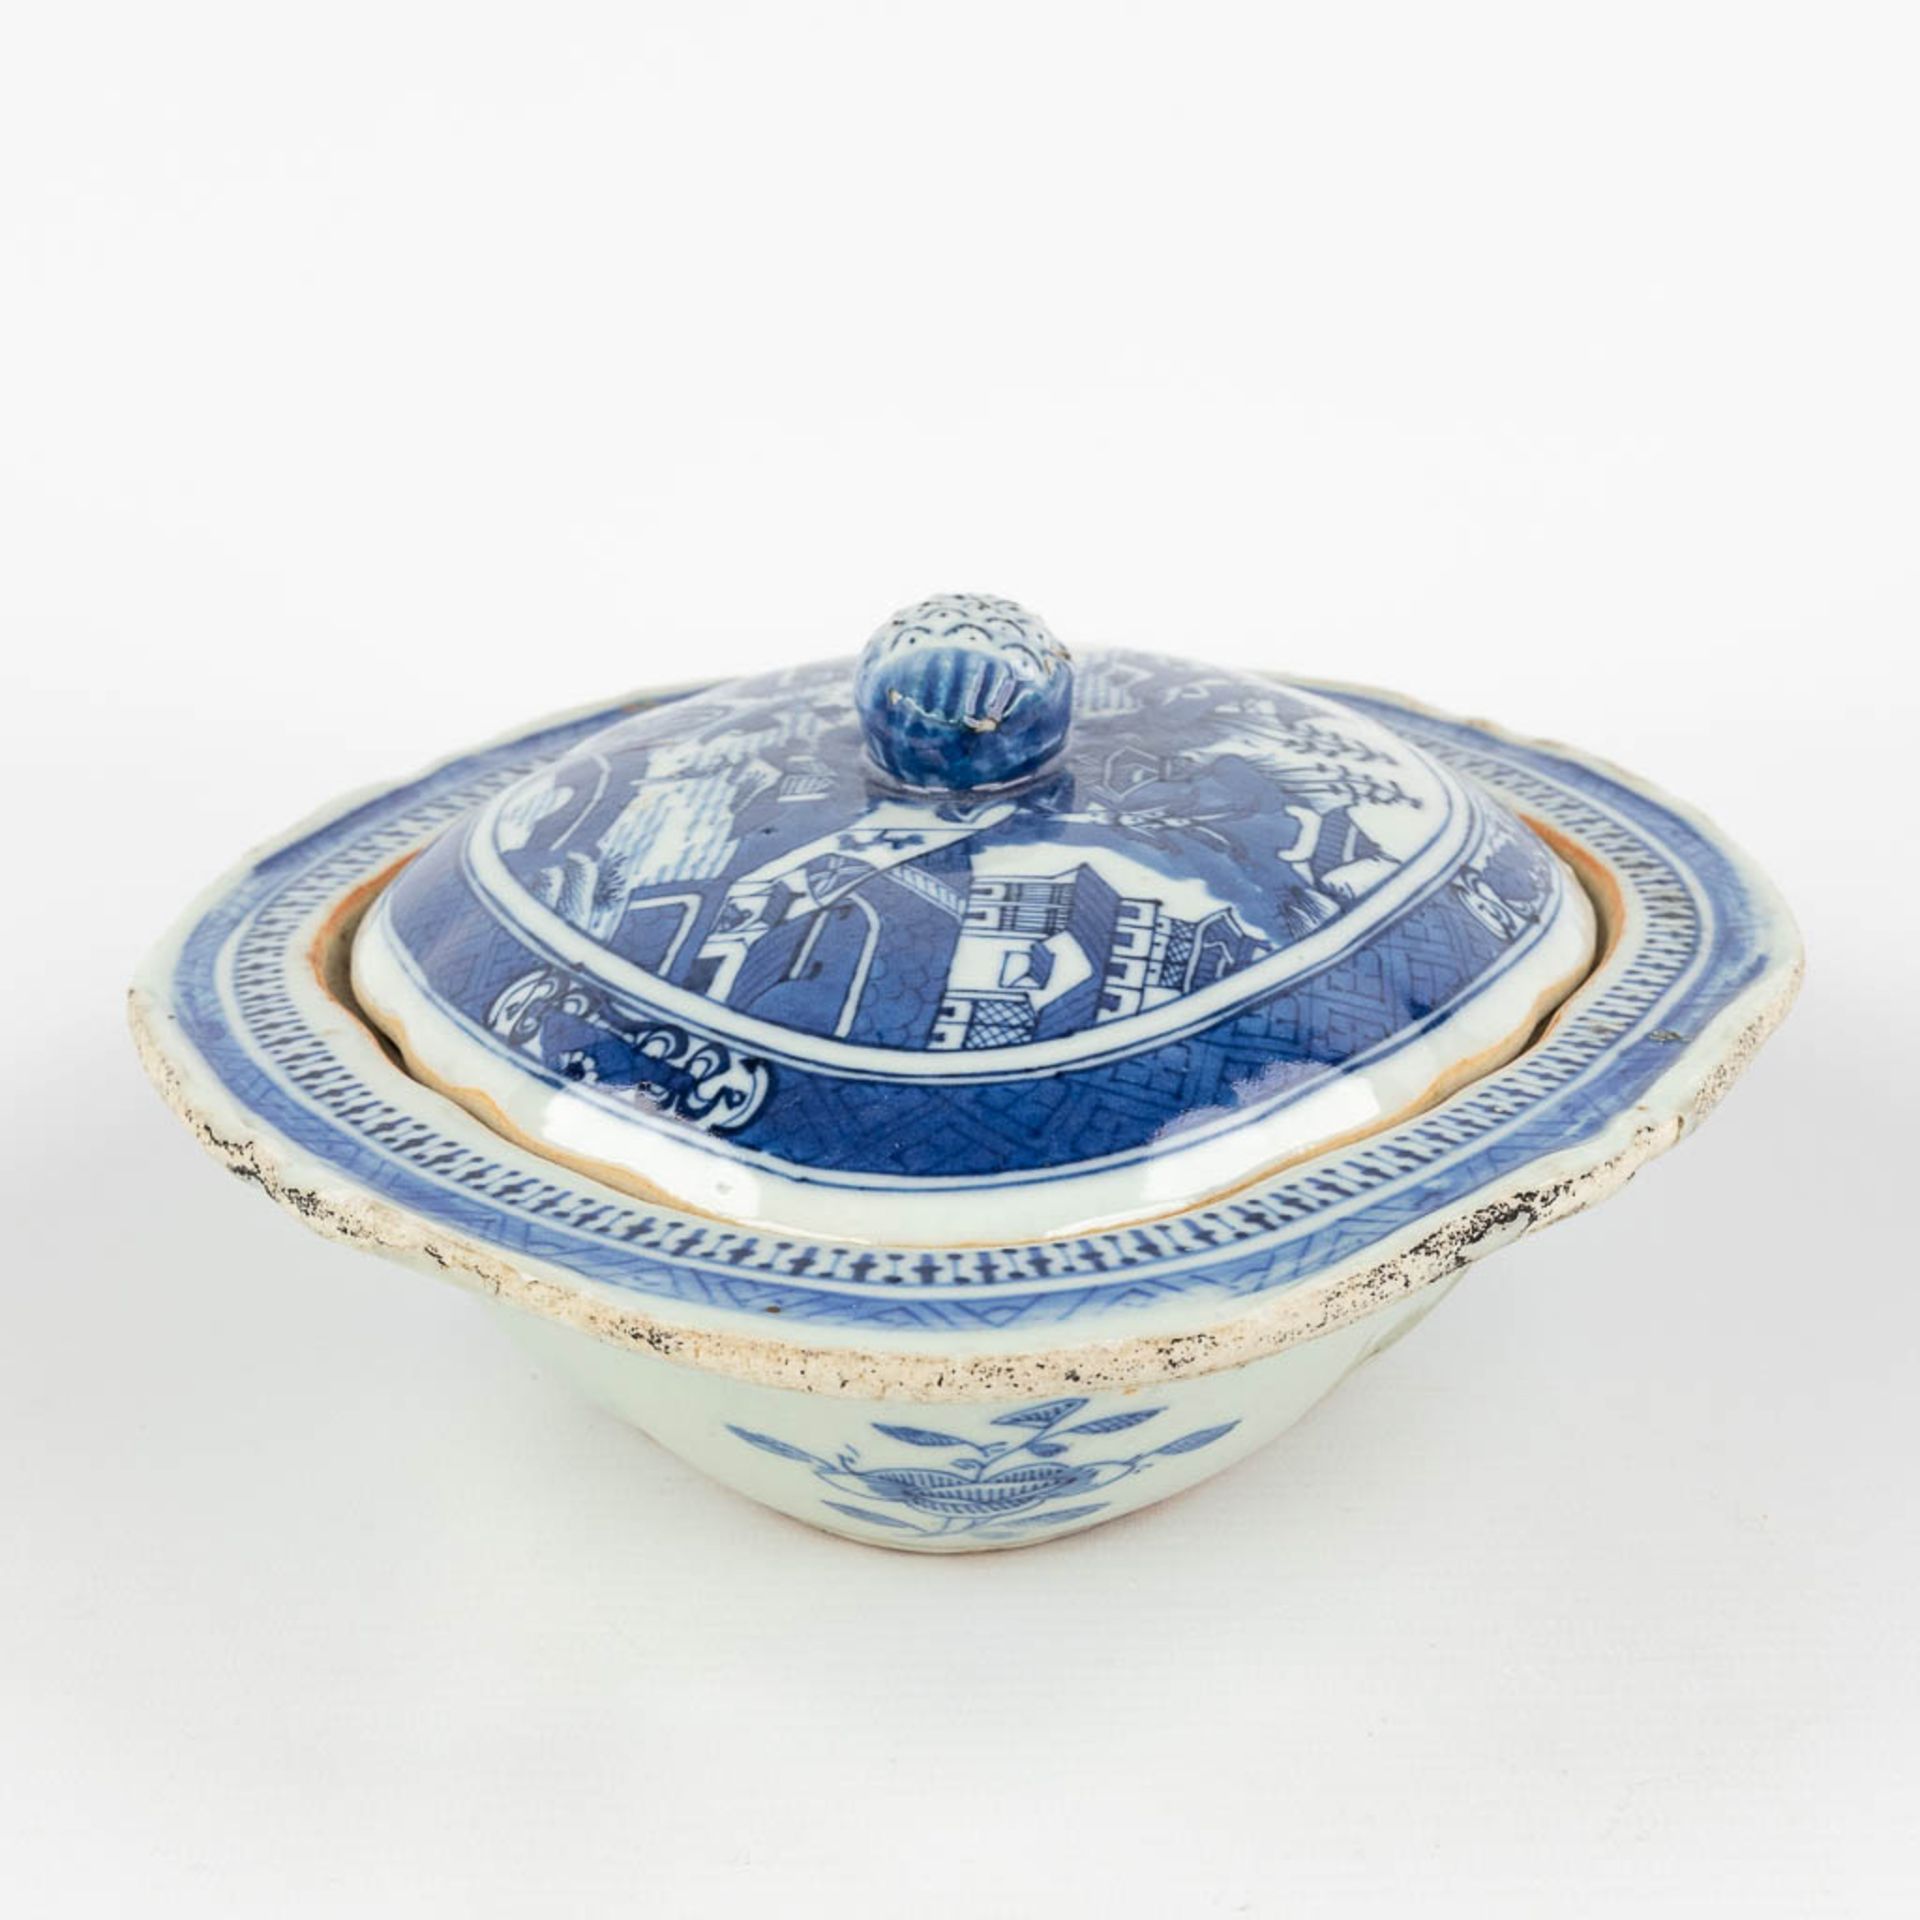 A Chinese bowl with a lid and blue-white landscape decor. 19th C. (L: 21,5 x W: 26,5 x H: 10 cm) - Image 6 of 15